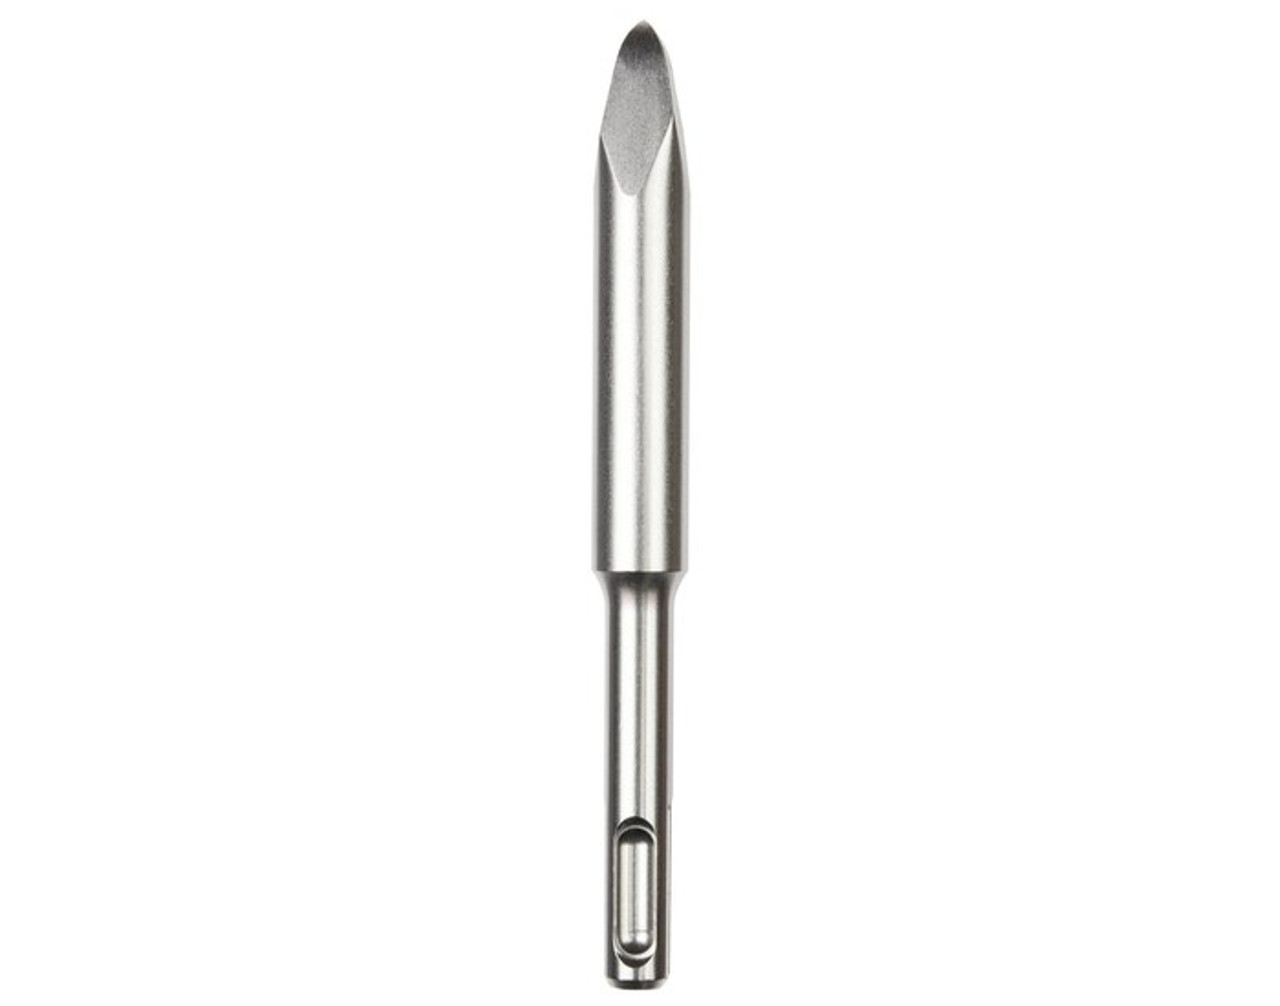 Milwaukee 3/4 in SDS-Plus Chisel Bit 48-62-6012 - 5.5 in Overall Length - High Speed Steel - SDS-Plus Shank